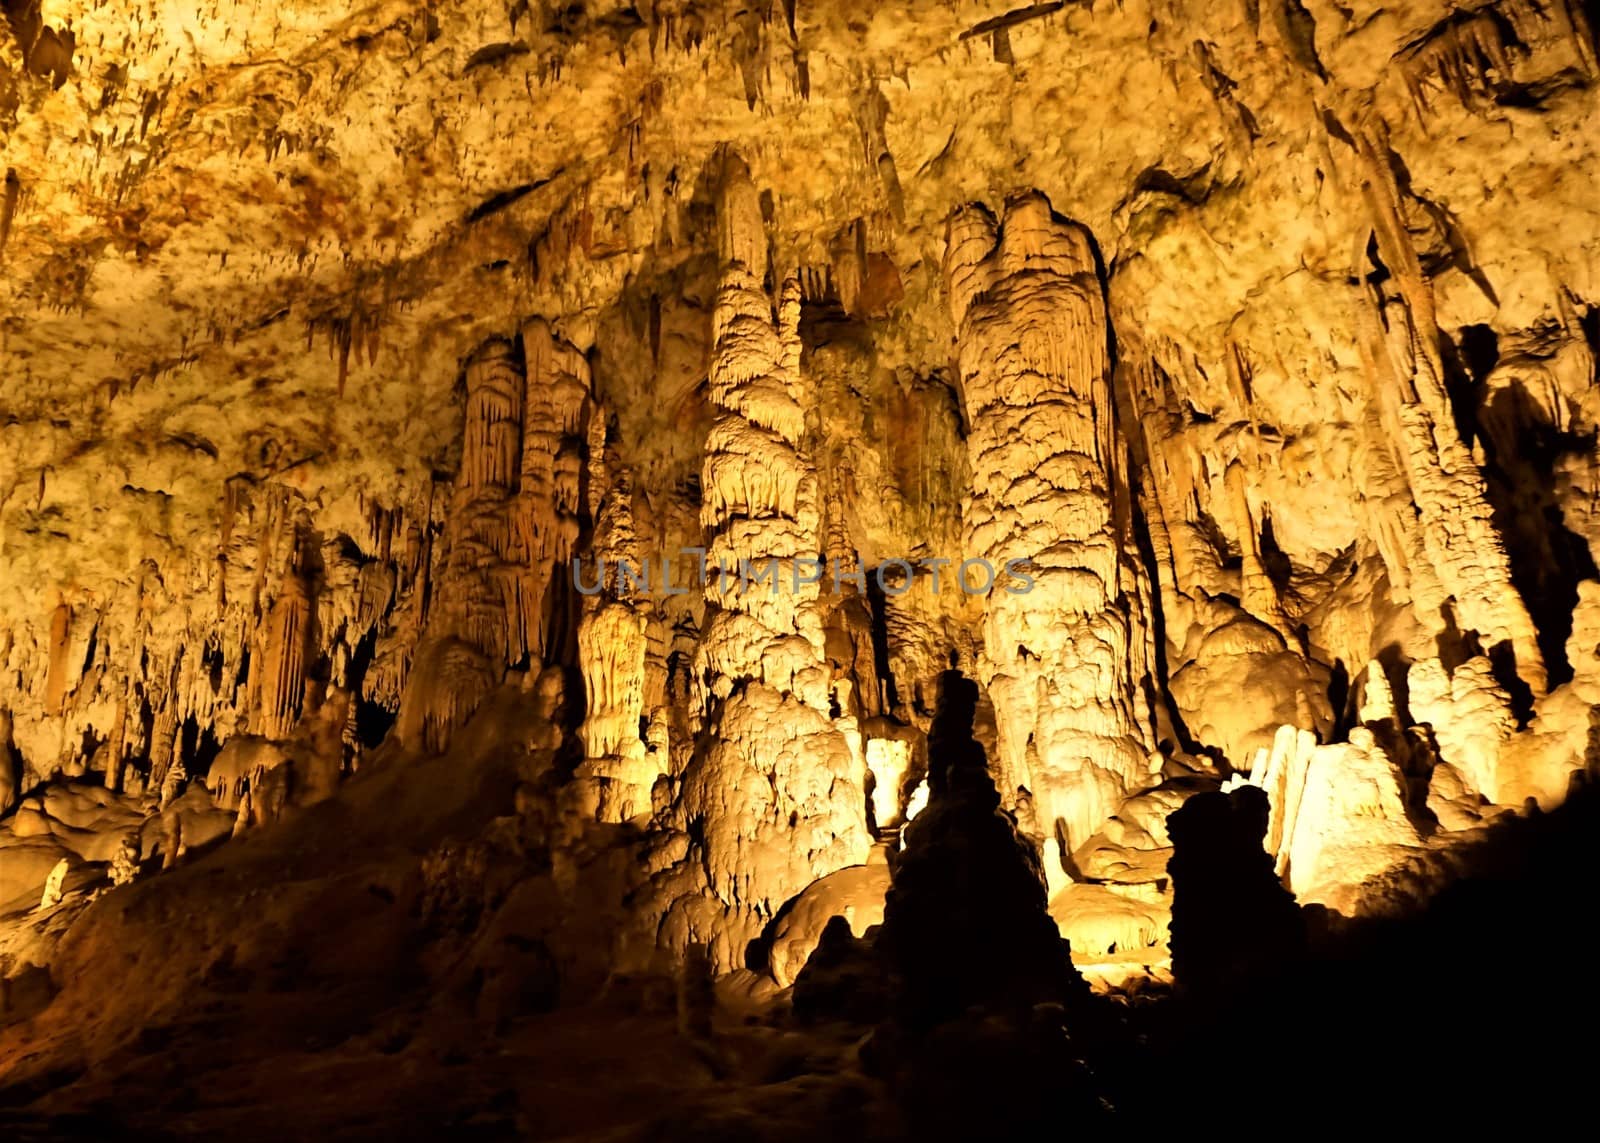 Impressive dripstone columns in the Postojna caves by pisces2386